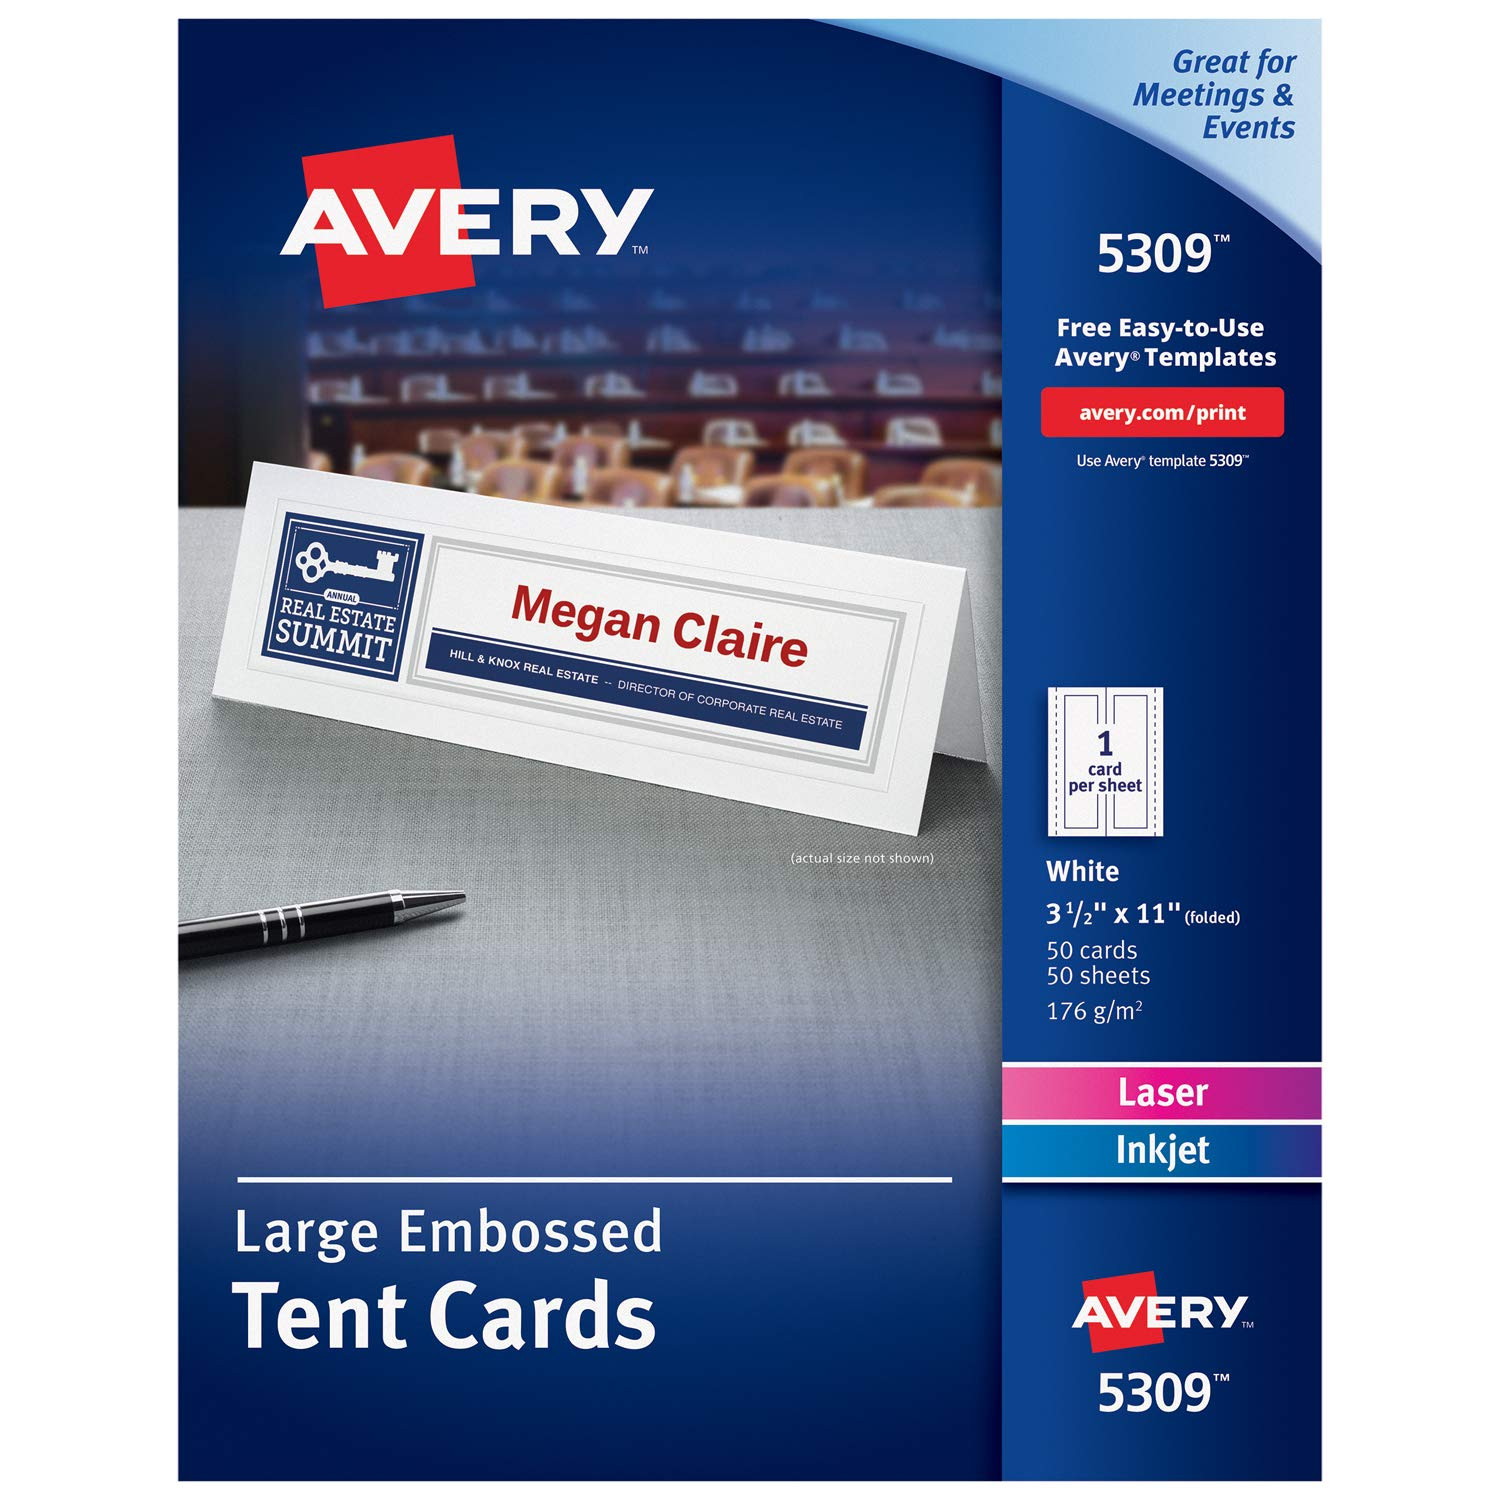 Avery Printable Tent Cards Laser &amp; Inkjet Printers 50 Cards 3 5 X 11 5309 White Of Avery Business Card Template for Mac